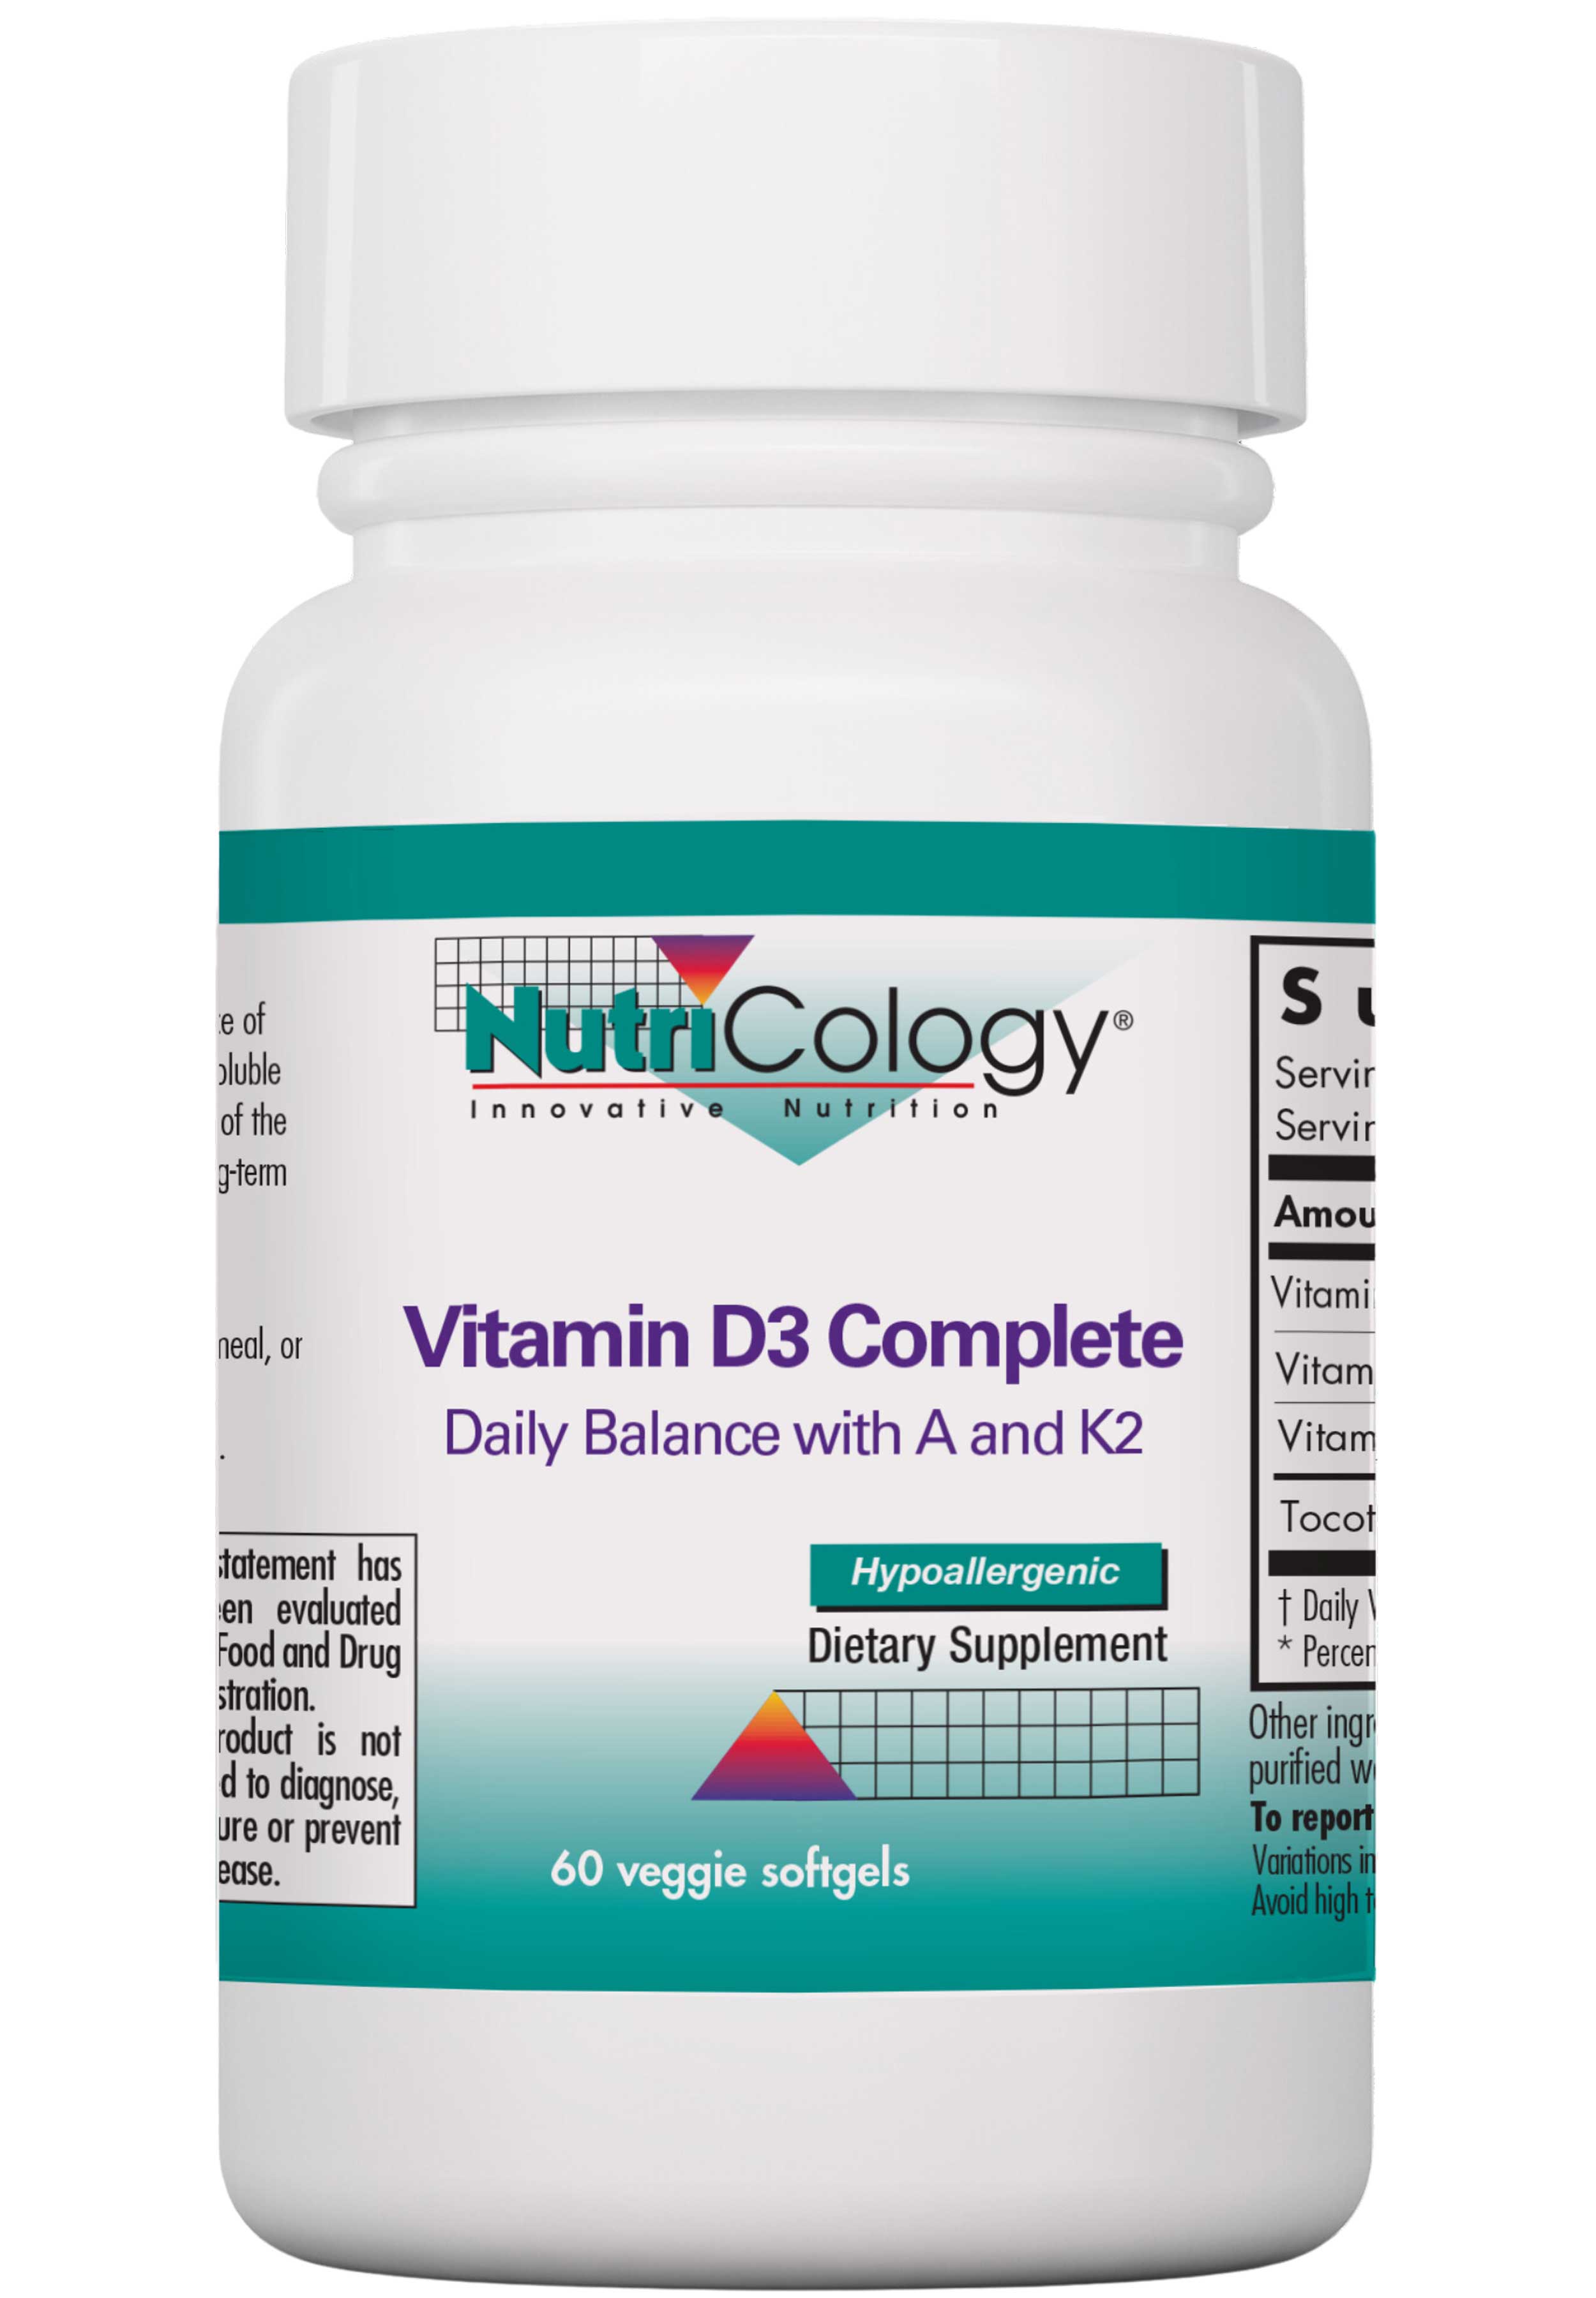 Nutricology Vitamin D3 Complete